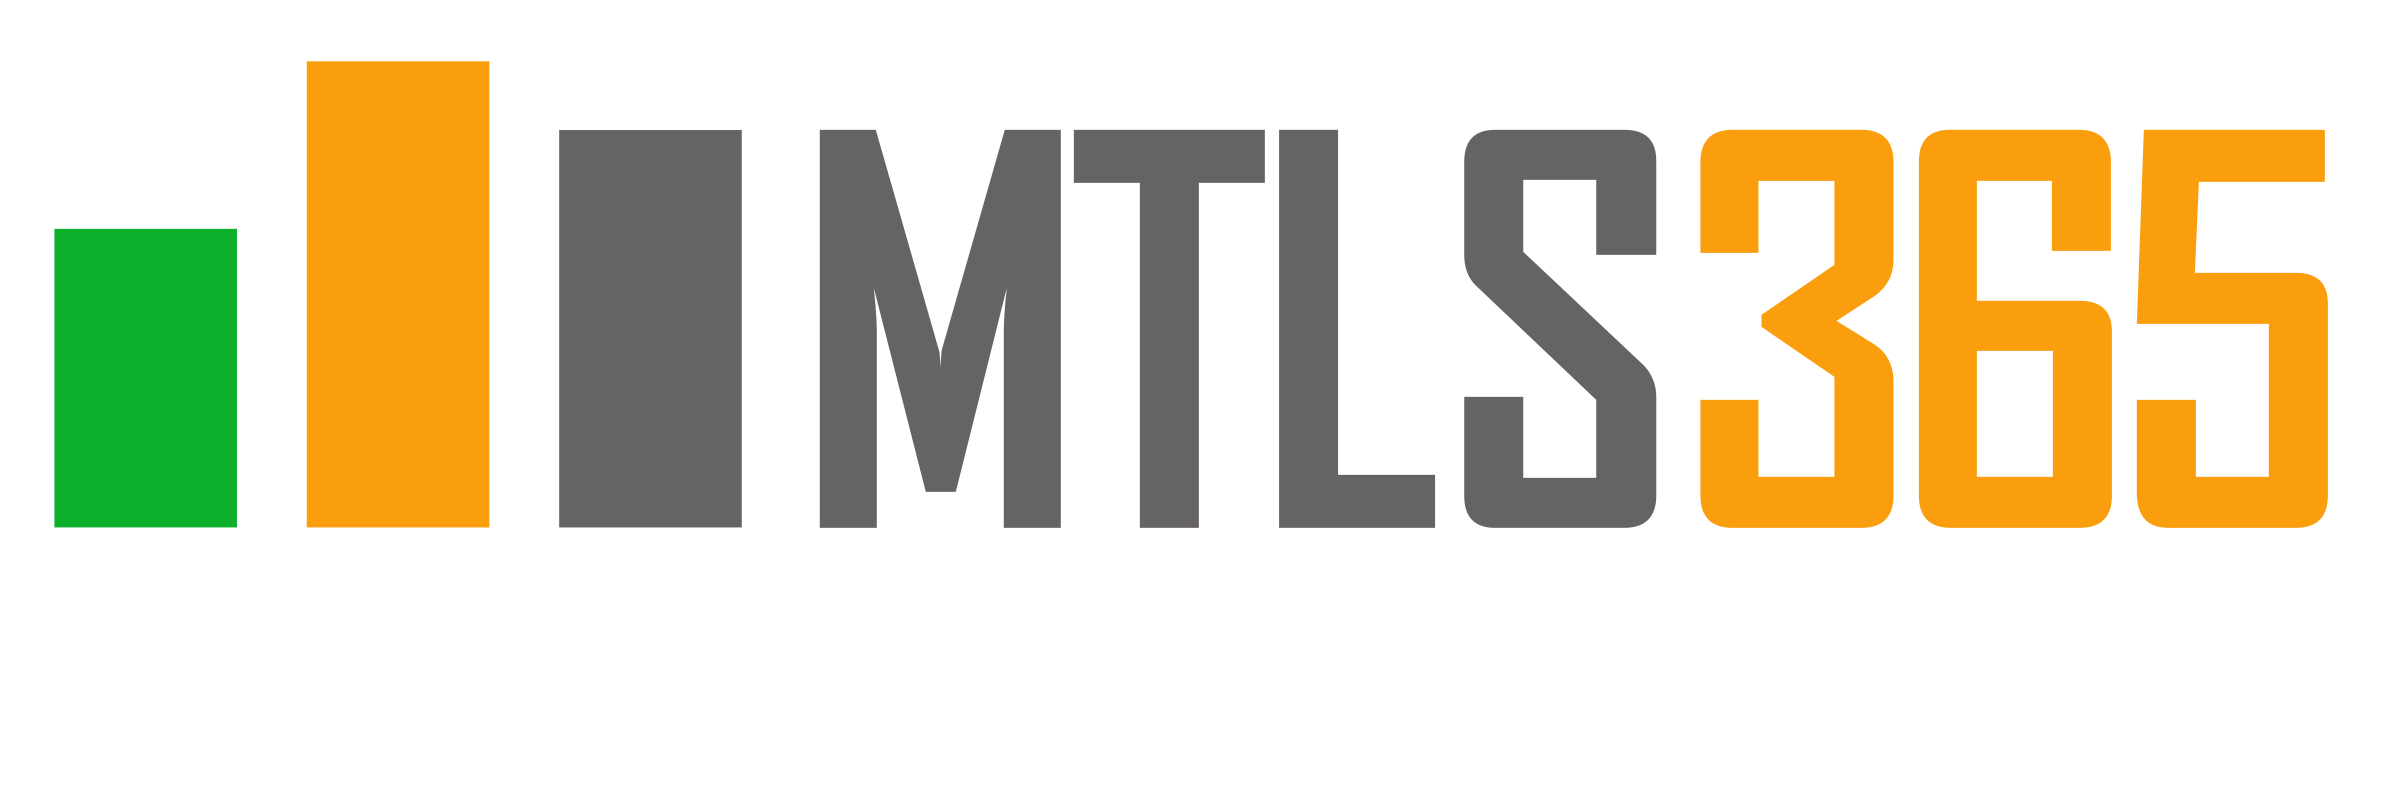 MTLS365 | Layered Security | SBA 8(a) Cybersecurity